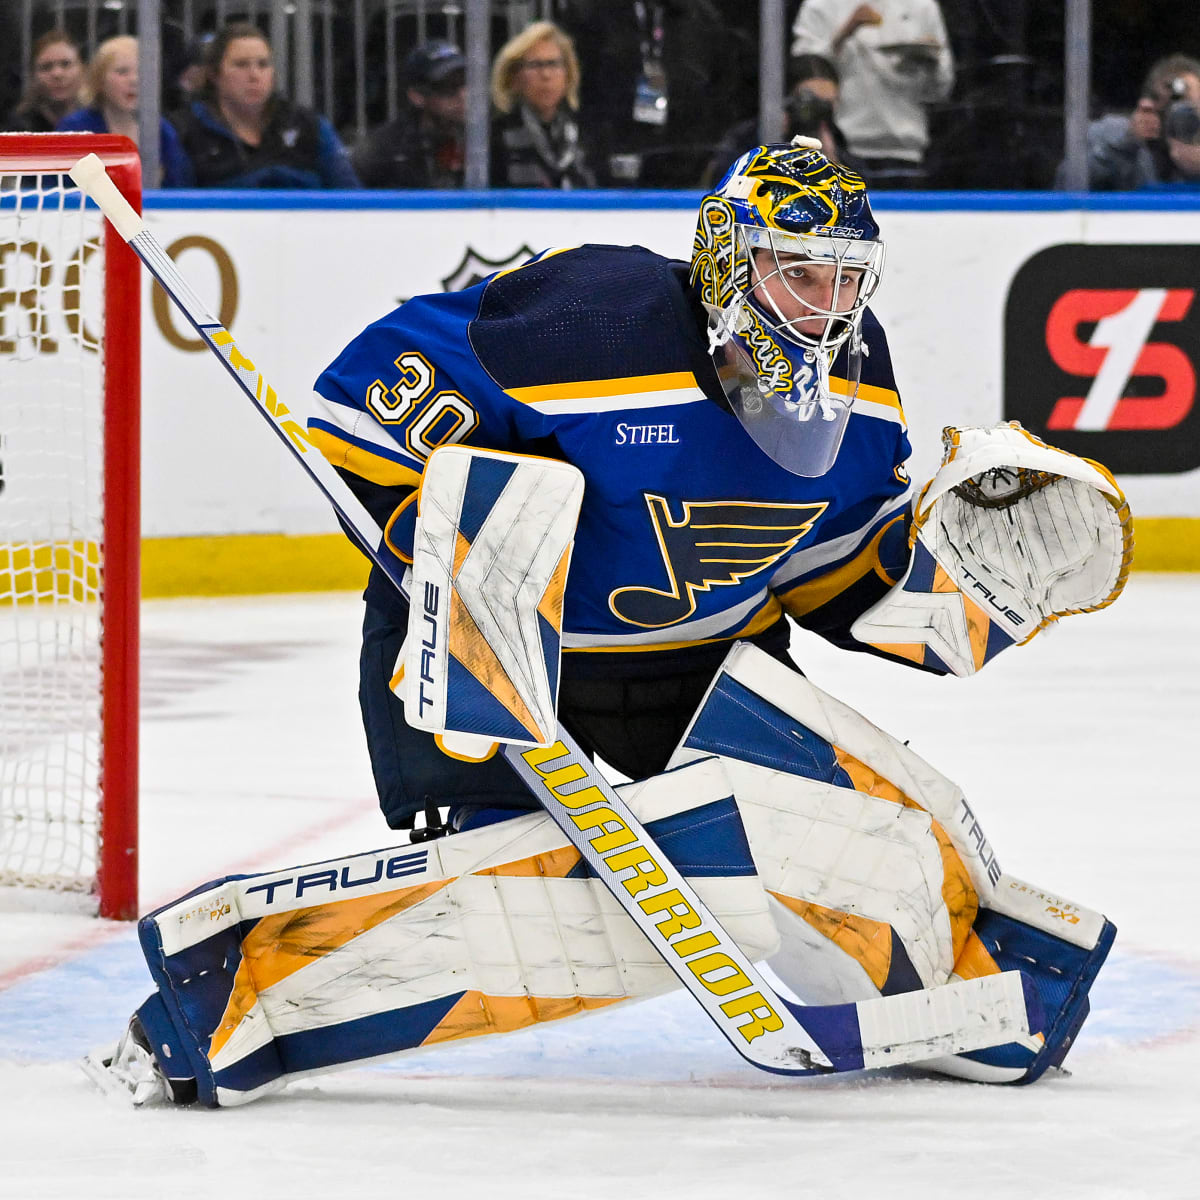 Ville Husso was good, but Blues netminder not unbeatable, Wild say